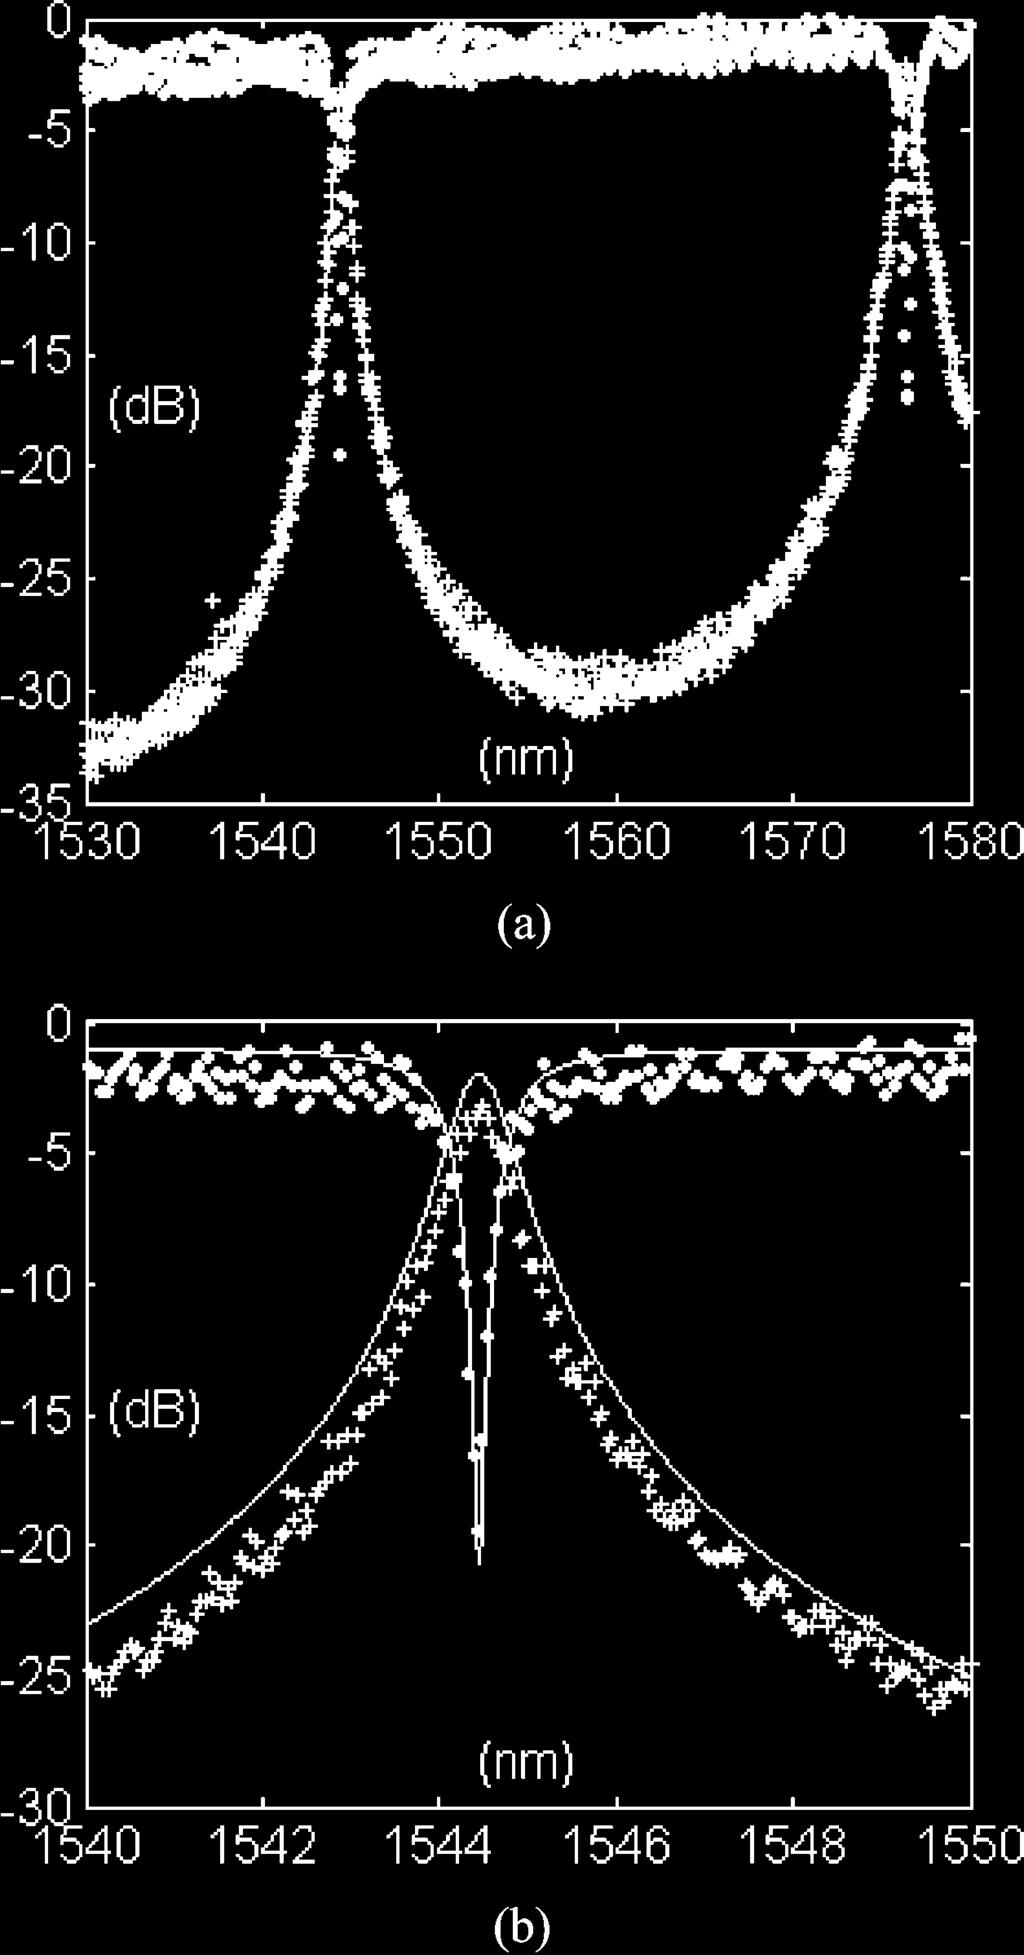 55 mis the group index in SOI waveguides with core cross section of nm nm and a top HSQ mask layer of 200 nm.